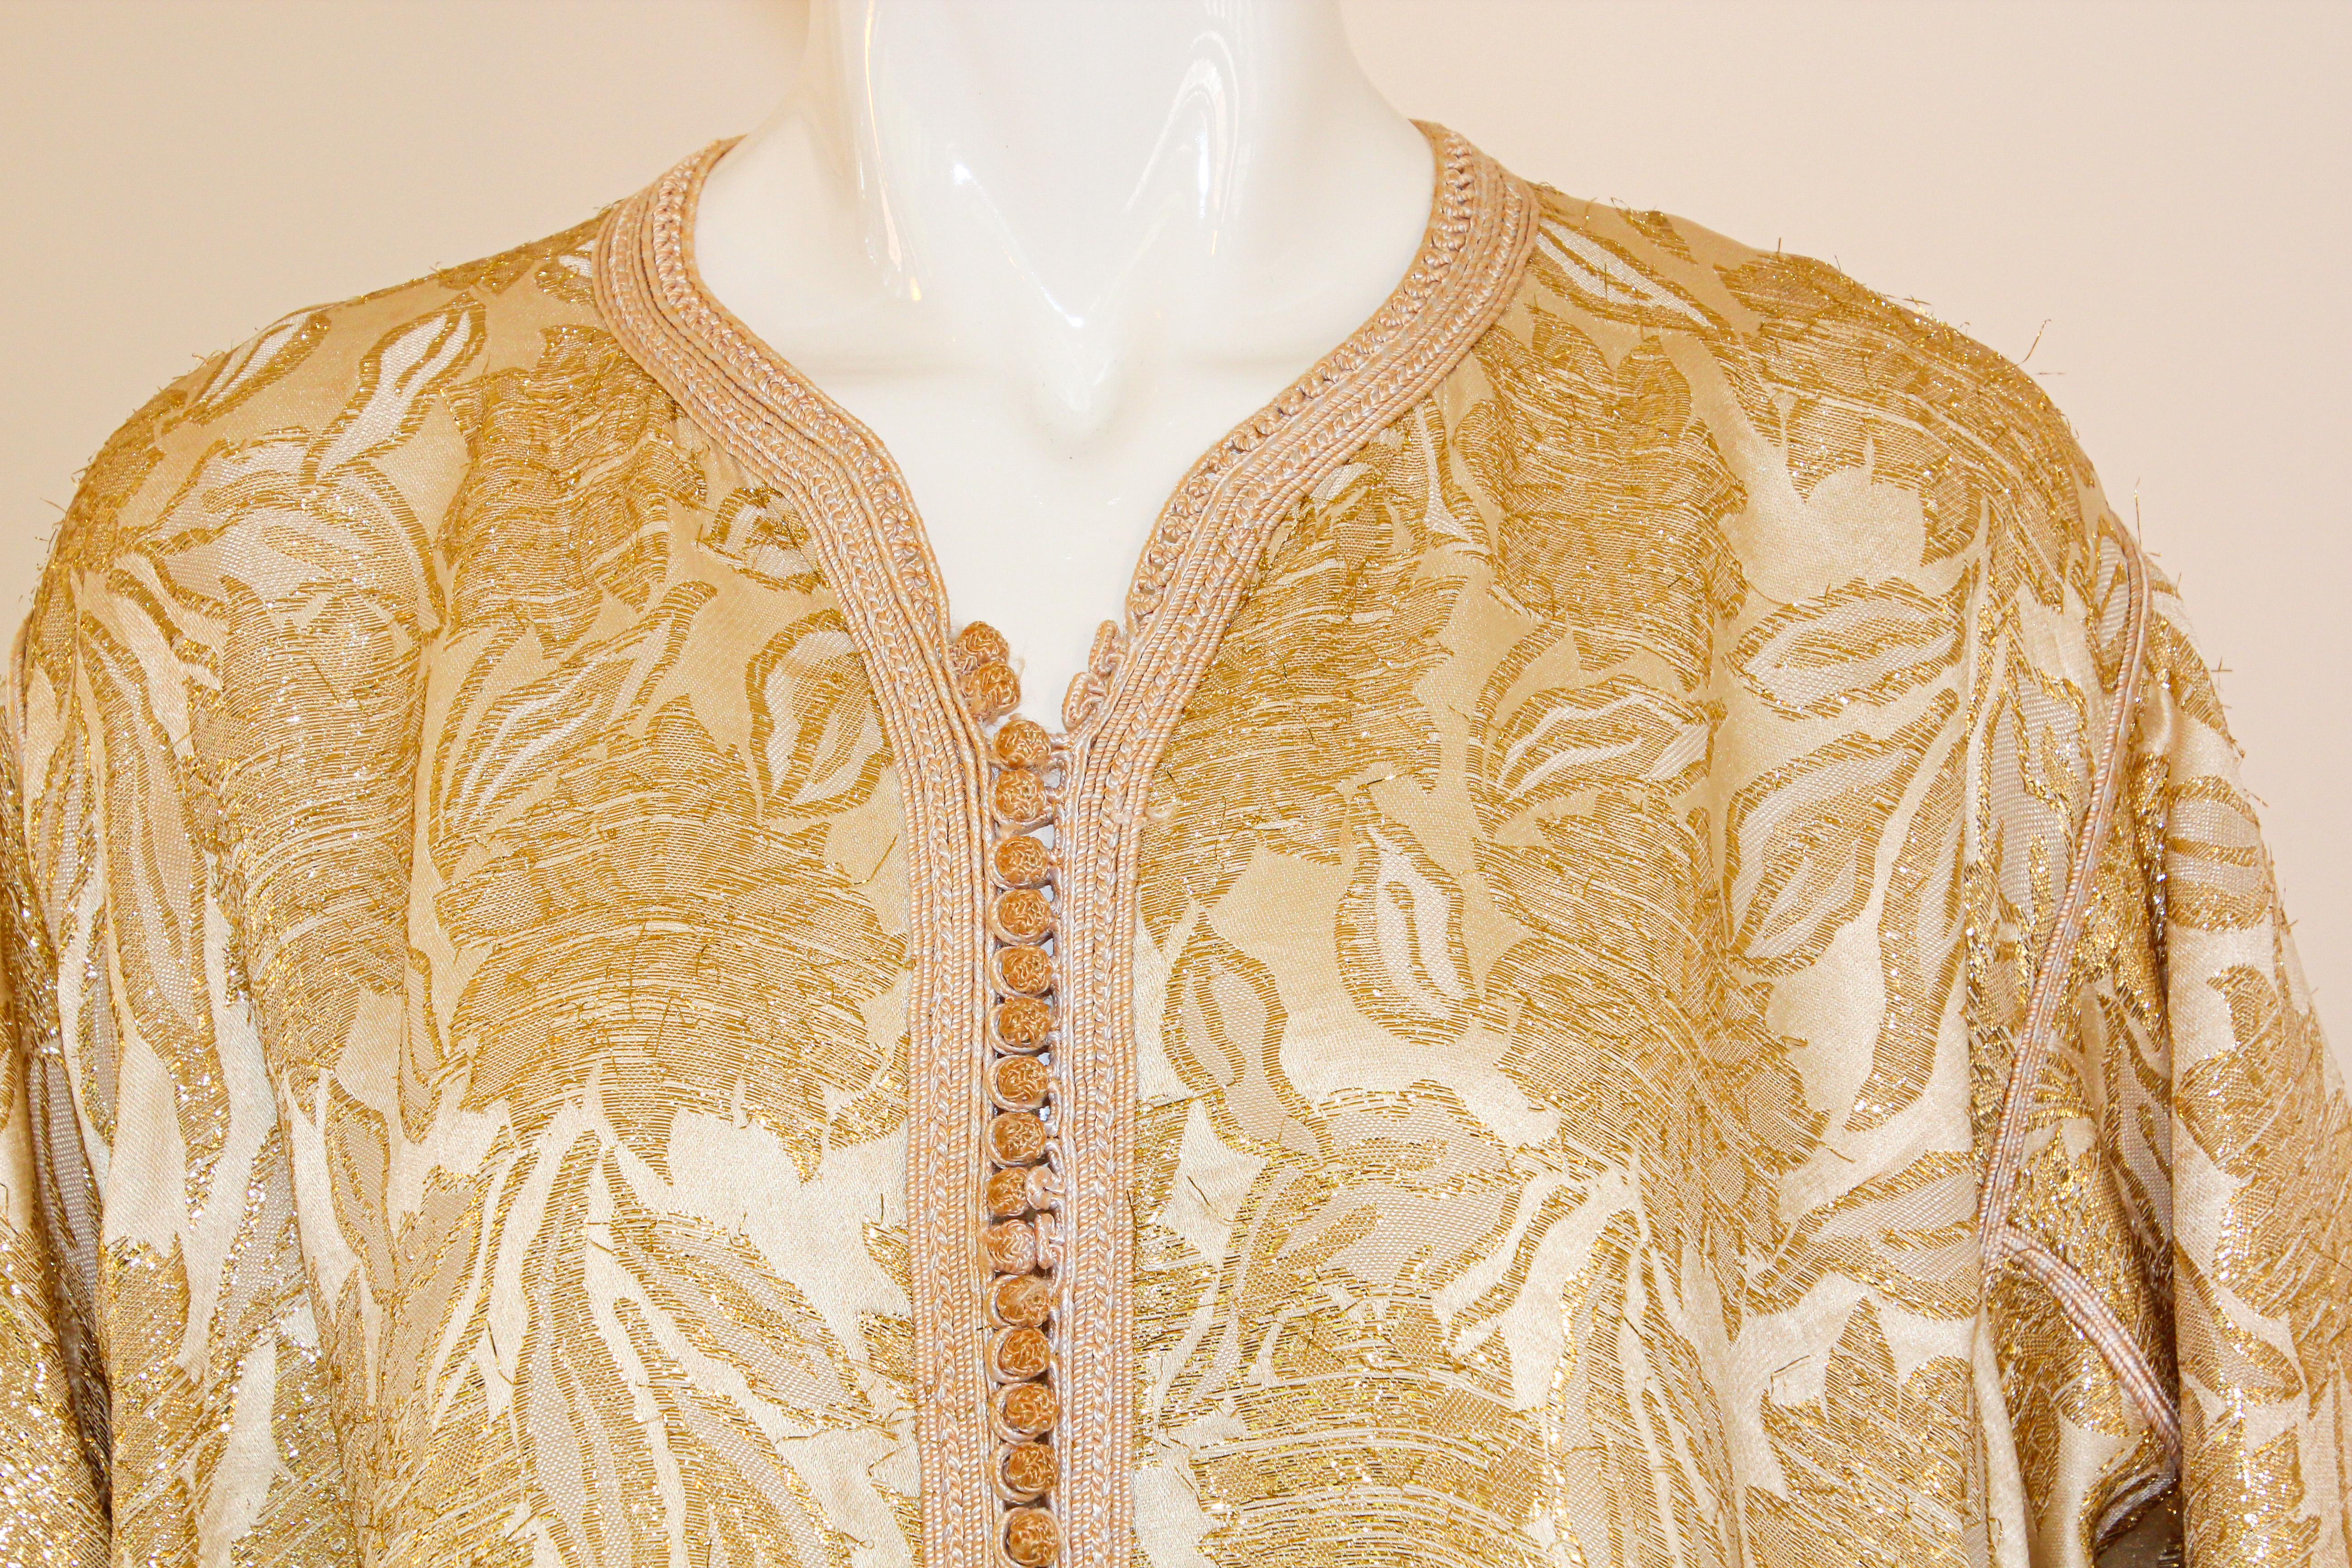 1940s Moroccan Antique Caftan Gold Damask Embroidered Caftan Maxi Dress For Sale 4